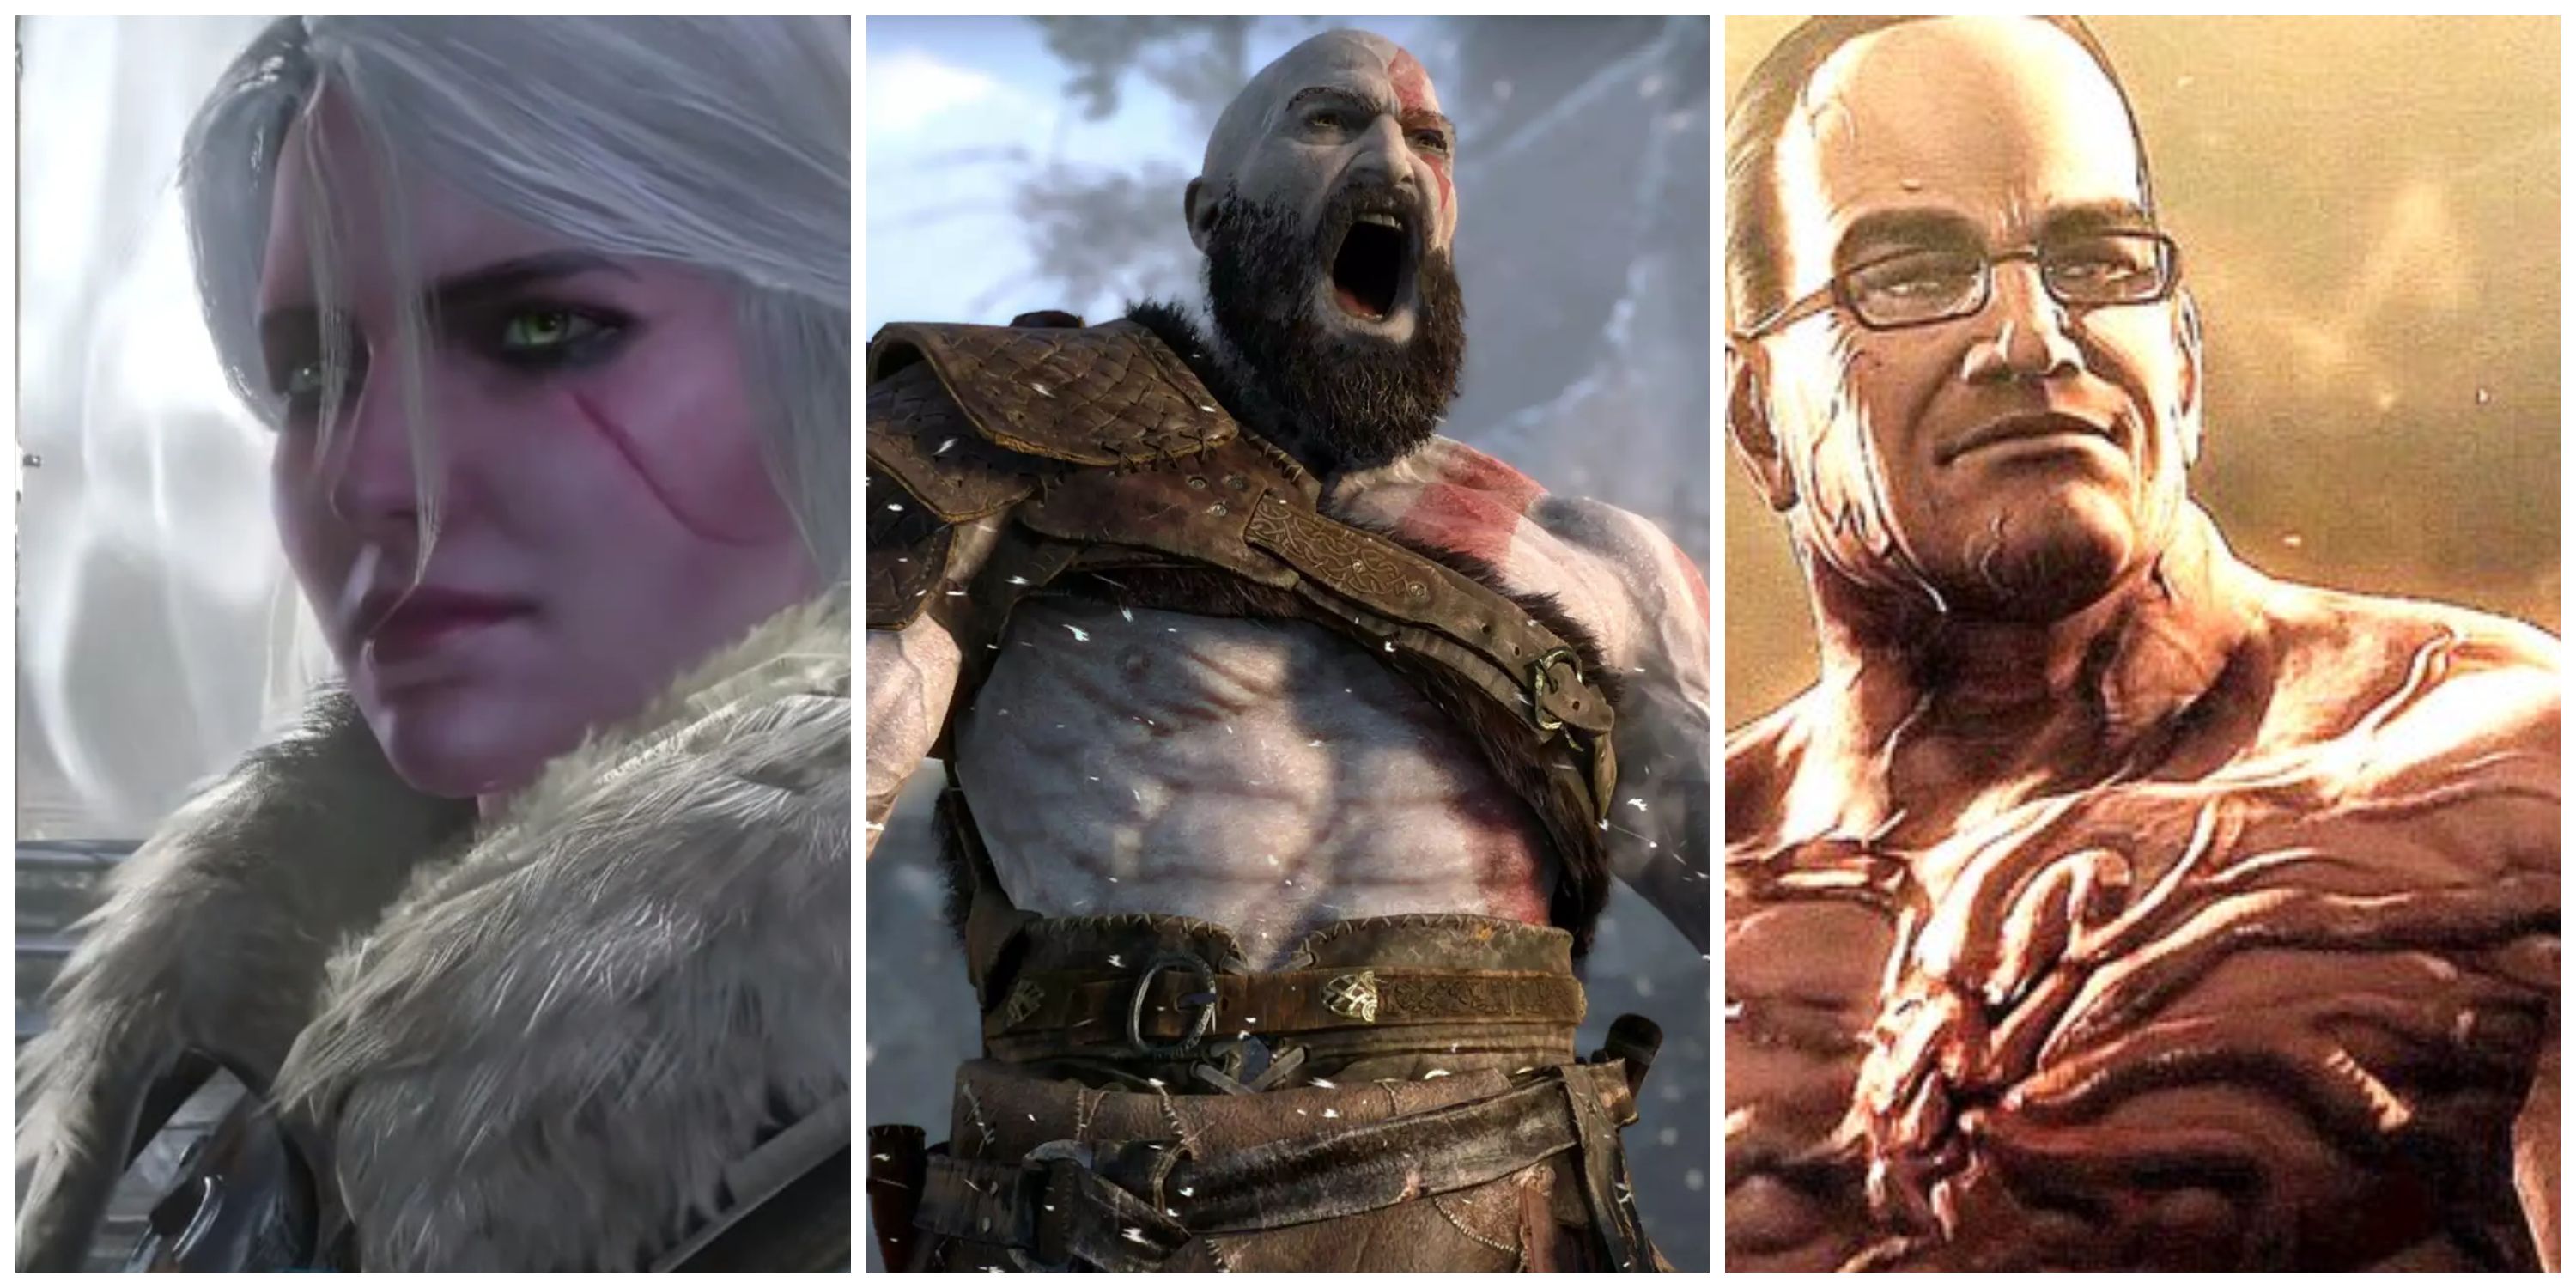 ciri from the witcher 3, kratos from god of war, senator armstrong from metal gear rising: revengeace